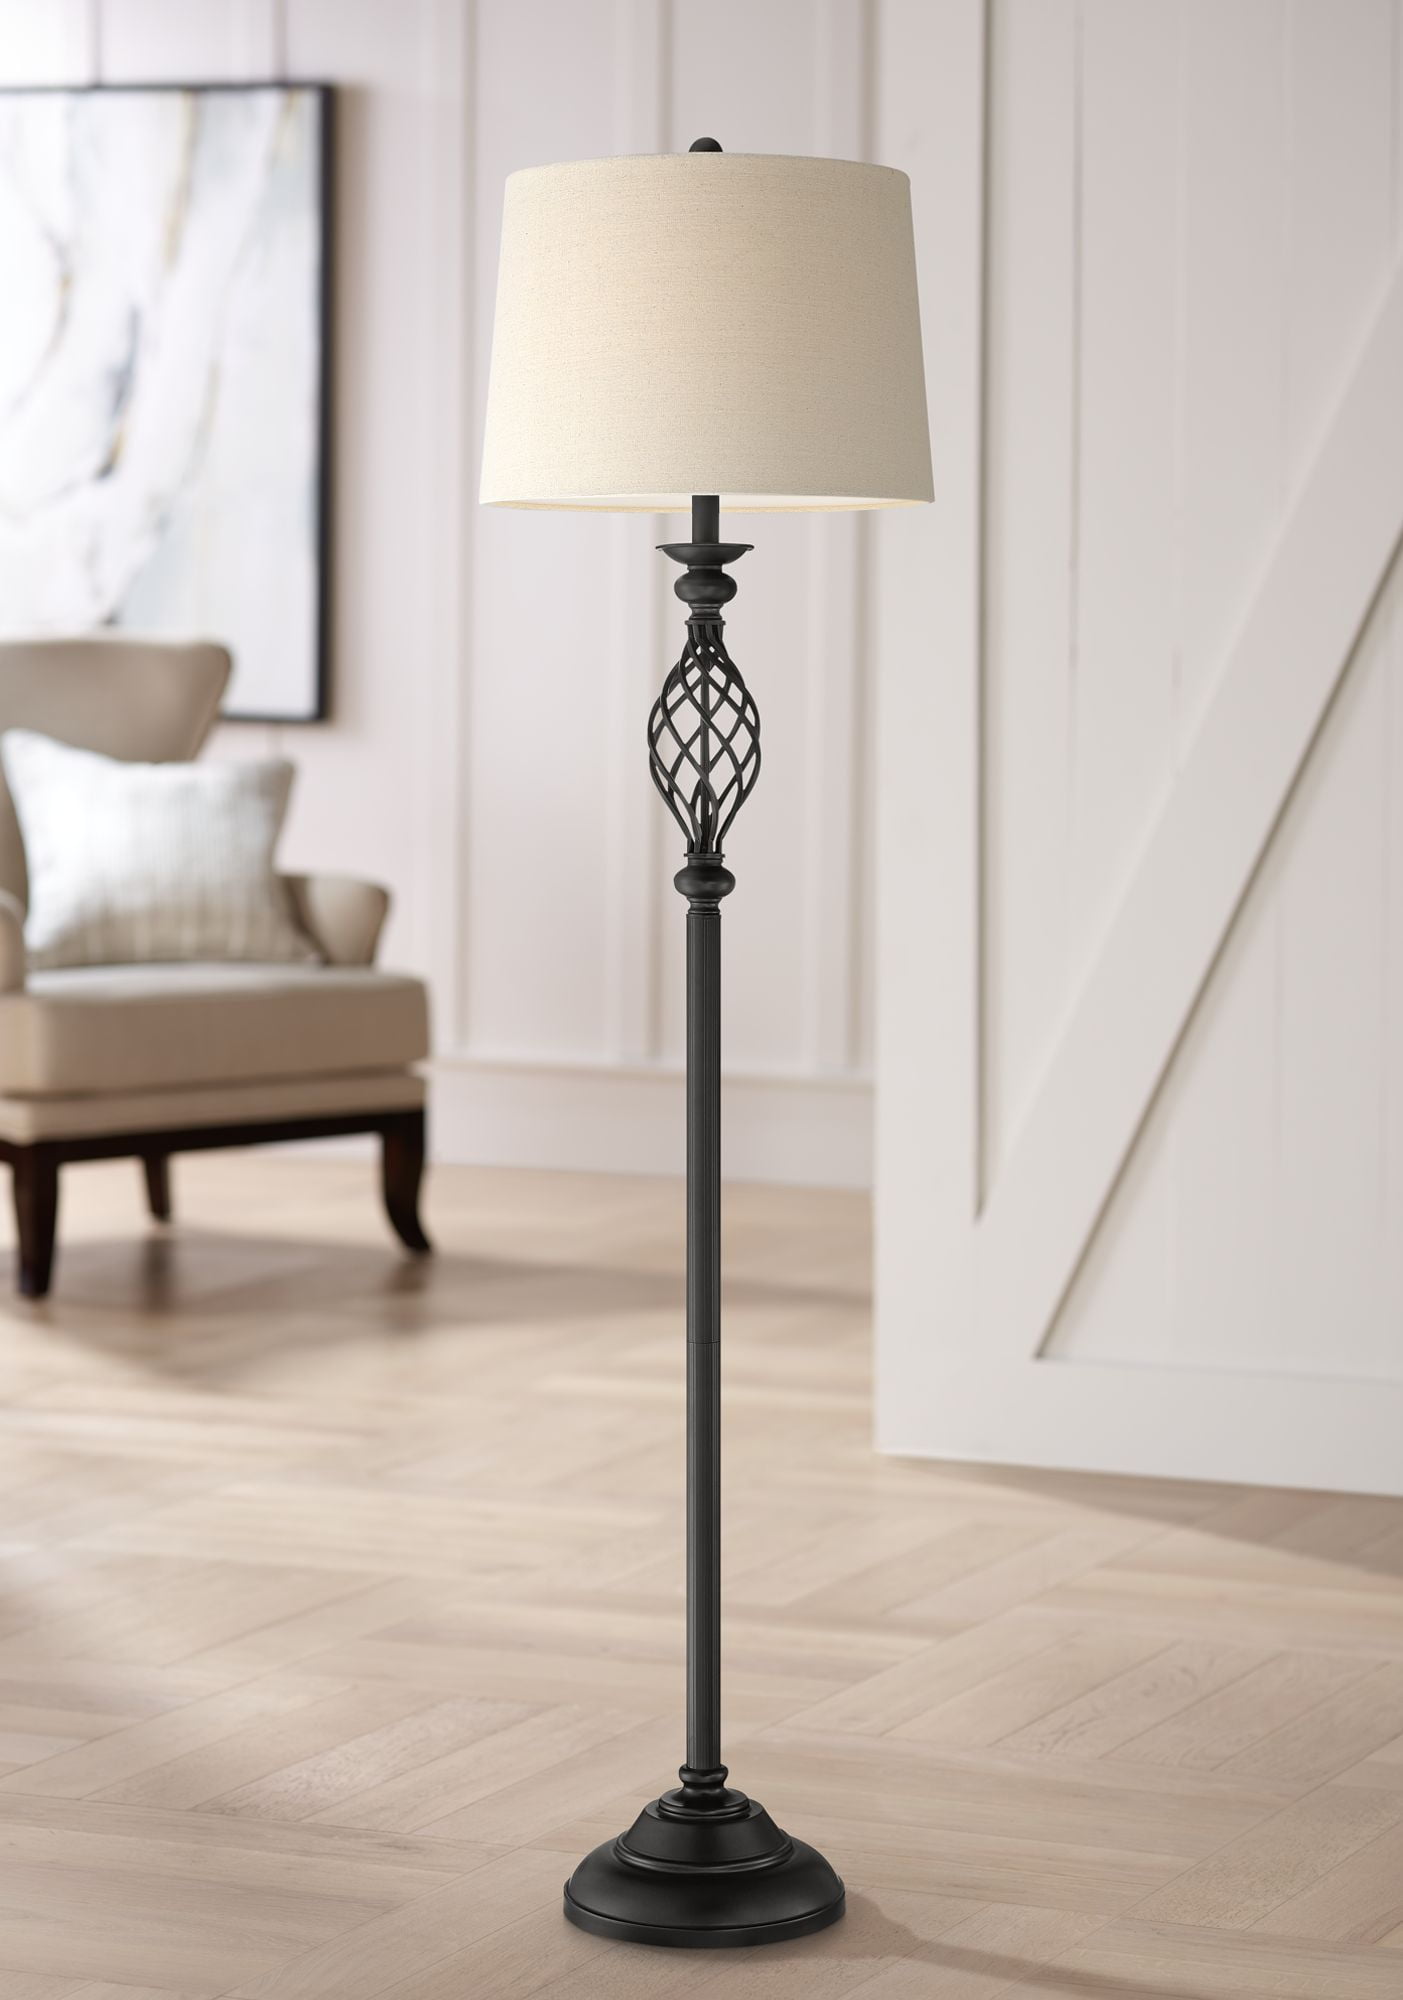 Franklin Iron Works Rustic Farmhouse Torchiere Floor Lamp 3-Light 